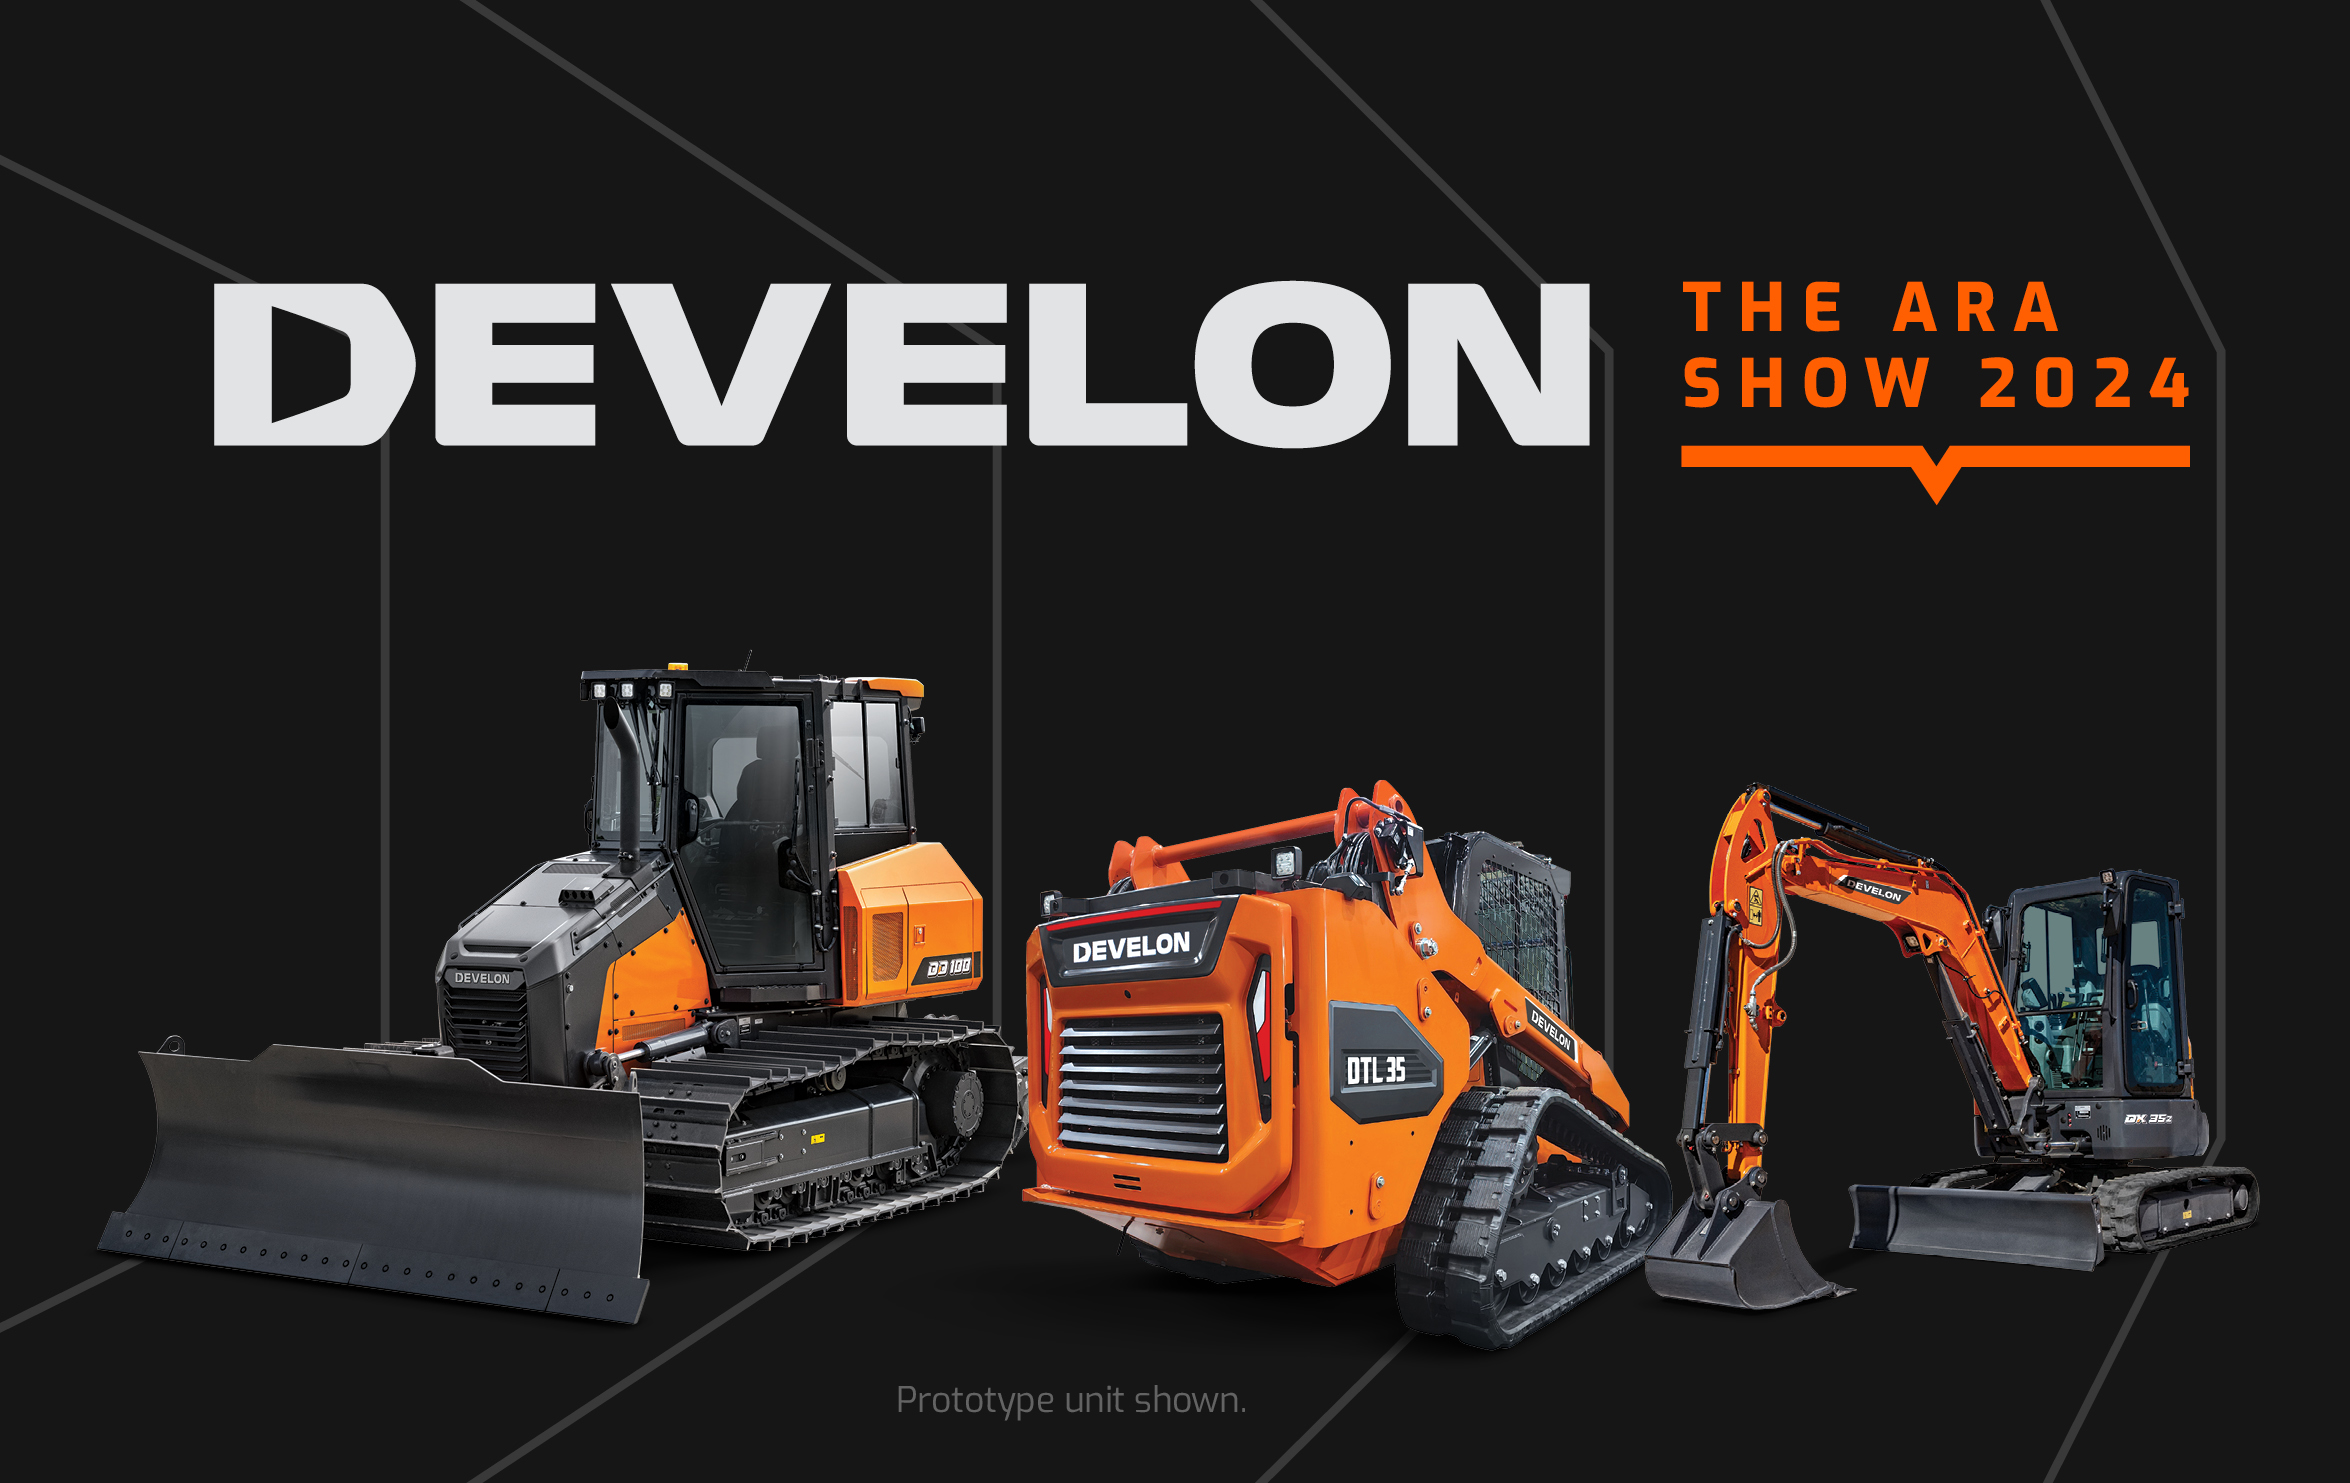 Lineup including the DD100 dozer, DTL35 compact track loader prototype and DX89R-7 mini excavator with the DEVELON logo and The ARA Show 2024 overlaid.